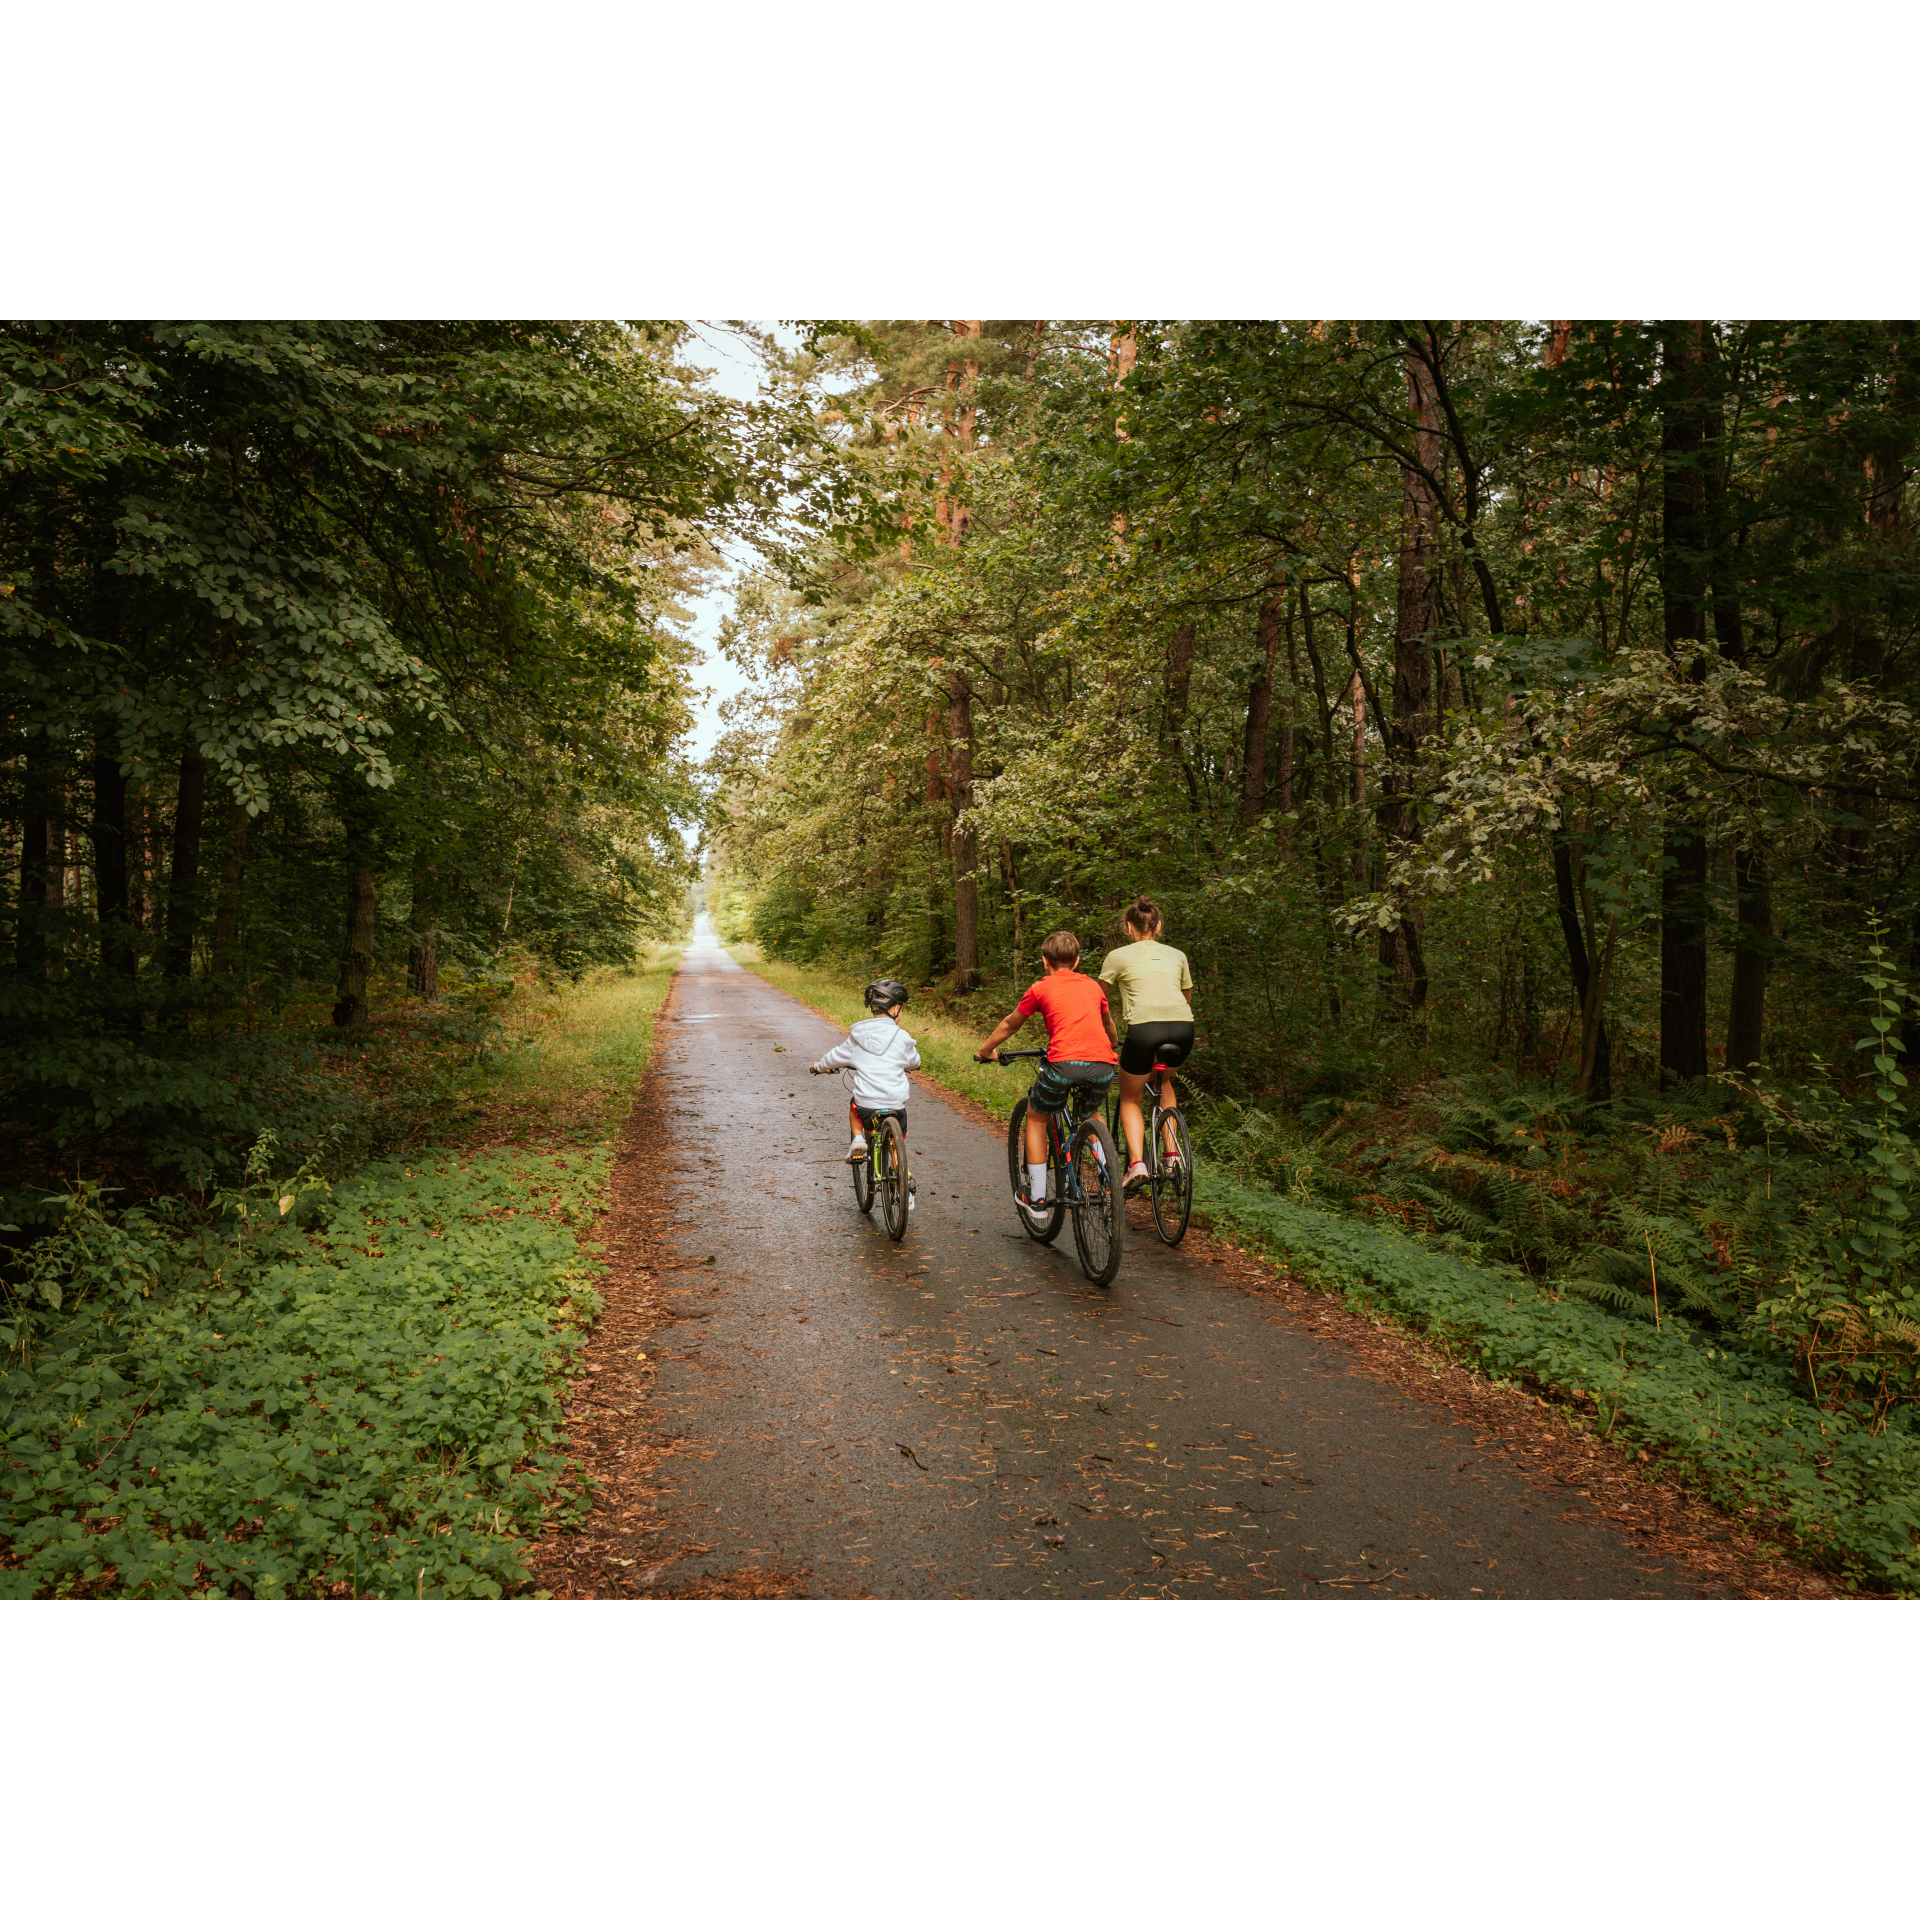 Cyclists on a forest road